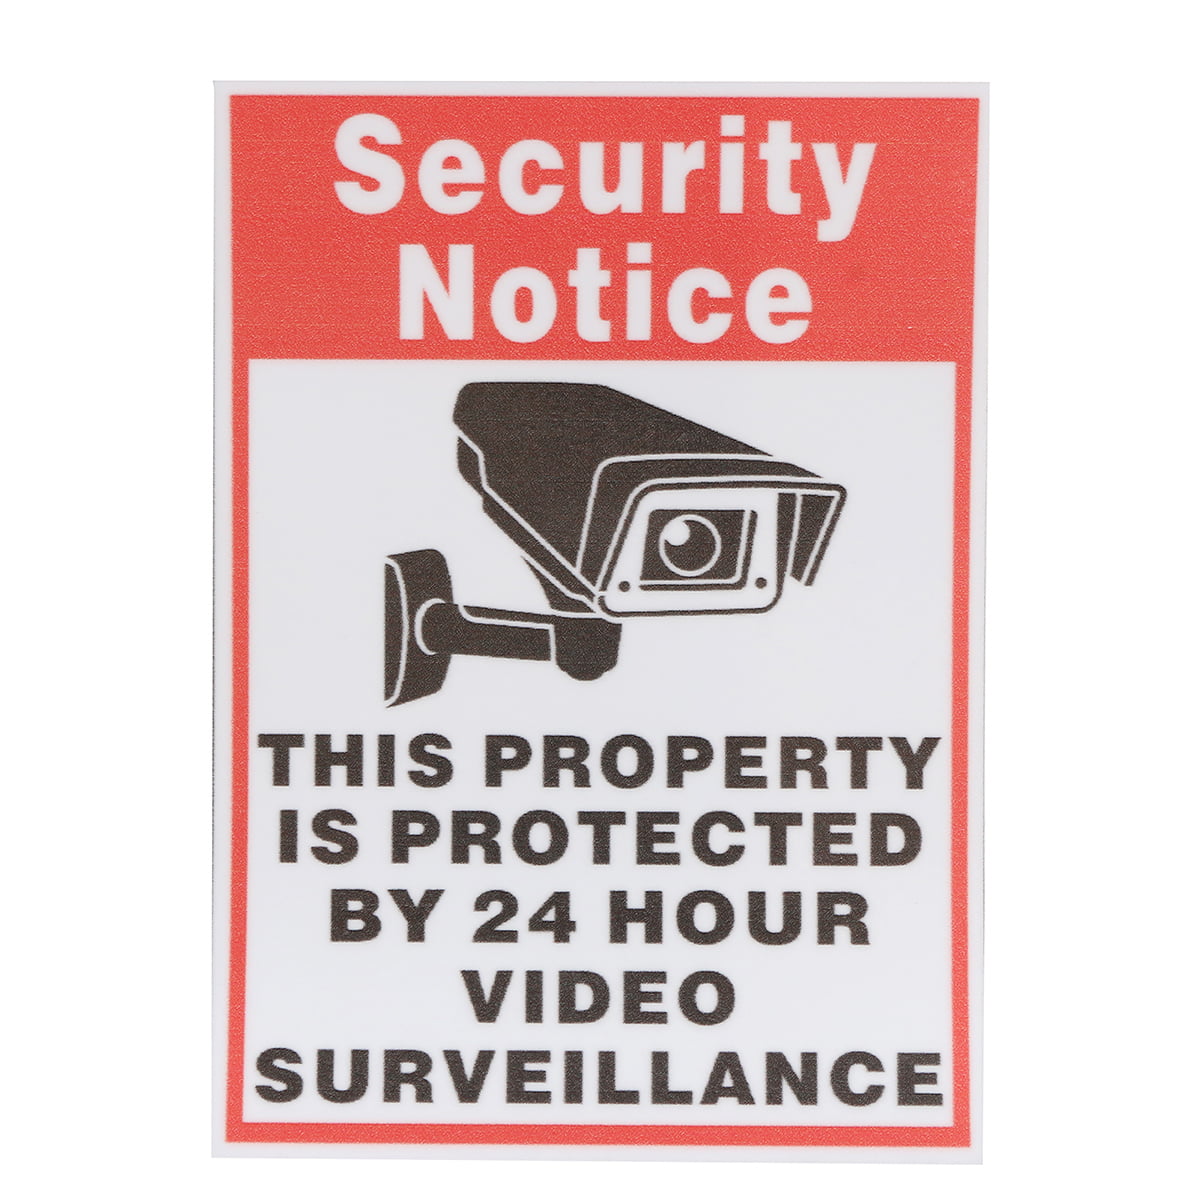 Warning Security Property 24 Hour Video Surveillance CCTV Cameras Sign Or Decal 